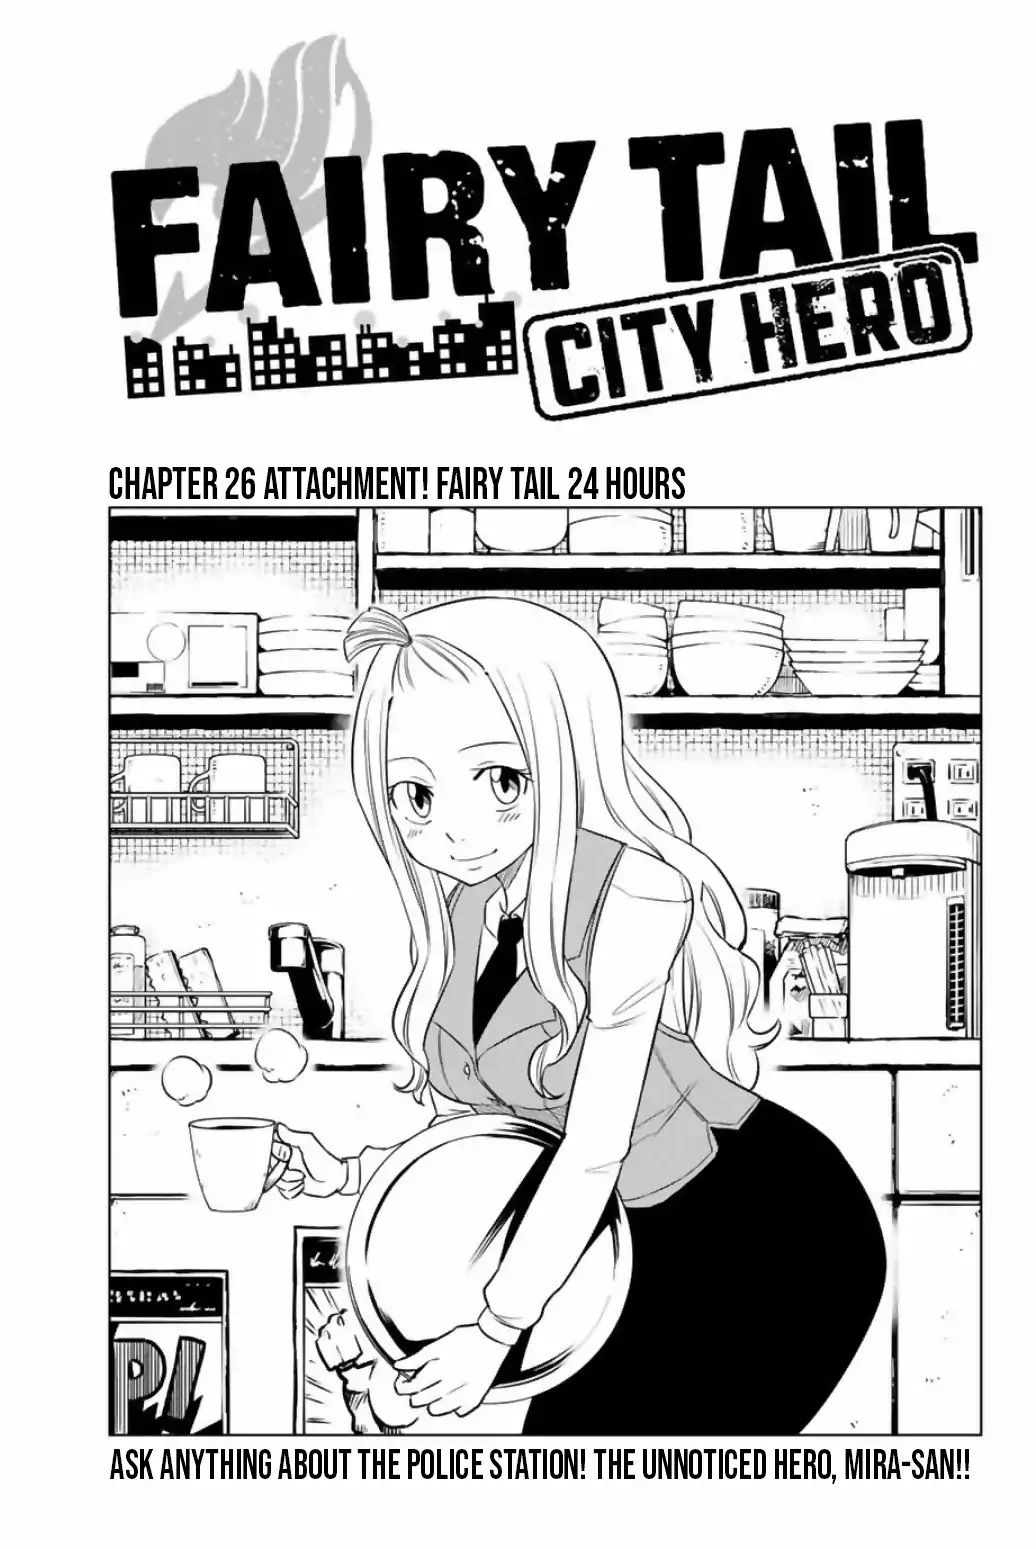 Fairy Tail City Hero Chapter 26: Attachment! Fairy Tail 24 Hours 1 - Picture 1